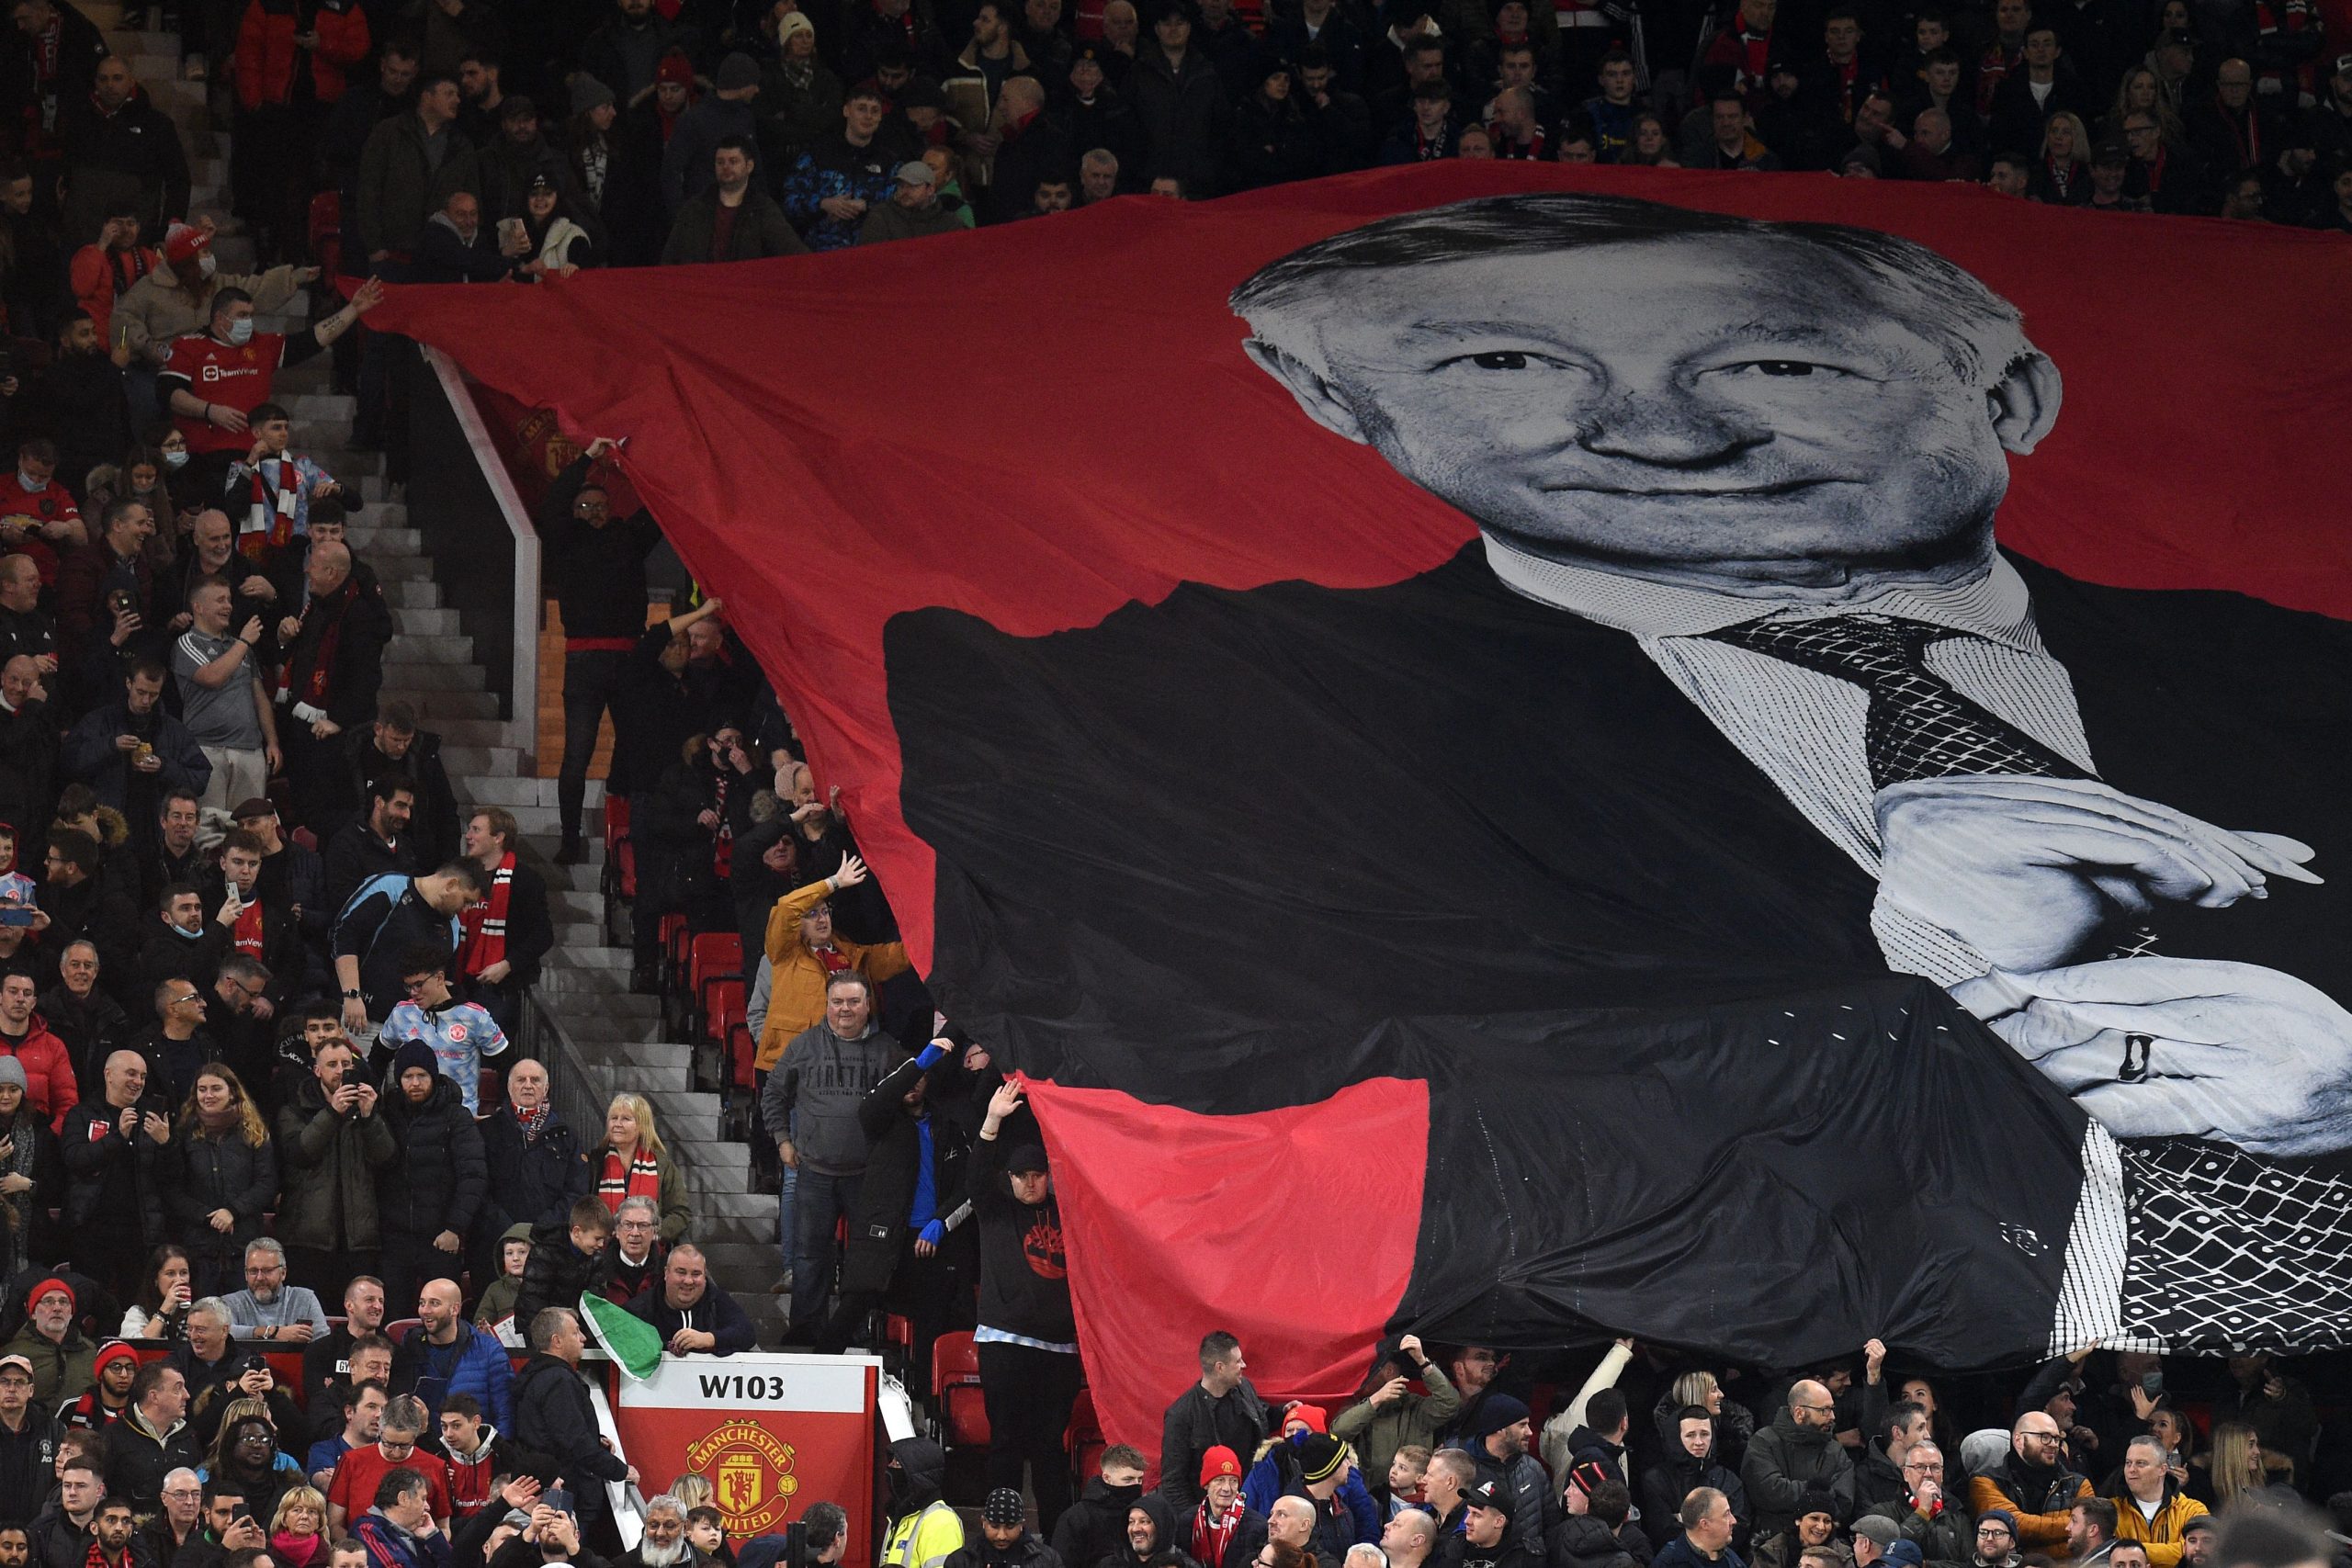 A large banner showing former manager Alex Ferguson is unfurled to celebrate his 80th birthday ahead of the English Premier League football match between Manchester United and Burnley at Old Trafford in Manchester, north-west England, on December 30, 2021. - RESTRICTED TO EDITORIAL USE. No use with unauthorized audio, video, data, fixture lists, club/league logos or 'live' services. Online in-match use limited to 120 images. An additional 40 images may be used in extra time. No video emulation. Social media in-match use limited to 120 images. An additional 40 images may be used in extra time. No use in betting publications, games or single club/league/player publications. (Photo by Oli SCARFF / AFP) / RESTRICTED TO EDITORIAL USE. No use with unauthorized audio, video, data, fixture lists, club/league logos or 'live' services. Online in-match use limited to 120 images. An additional 40 images may be used in extra time. No video emulation. Social media in-match use limited to 120 images. An additional 40 images may be used in extra time. No use in betting publications, games or single club/league/player publications. / RESTRICTED TO EDITORIAL USE. No use with unauthorized audio, video, data, fixture lists, club/league logos or 'live' services. Online in-match use limited to 120 images. An additional 40 images may be used in extra time. No video emulation. Social media in-match use limited to 120 images. An additional 40 images may be used in extra time. No use in betting publications, games or single club/league/player publications. (Photo by OLI SCARFF/AFP via Getty Images)